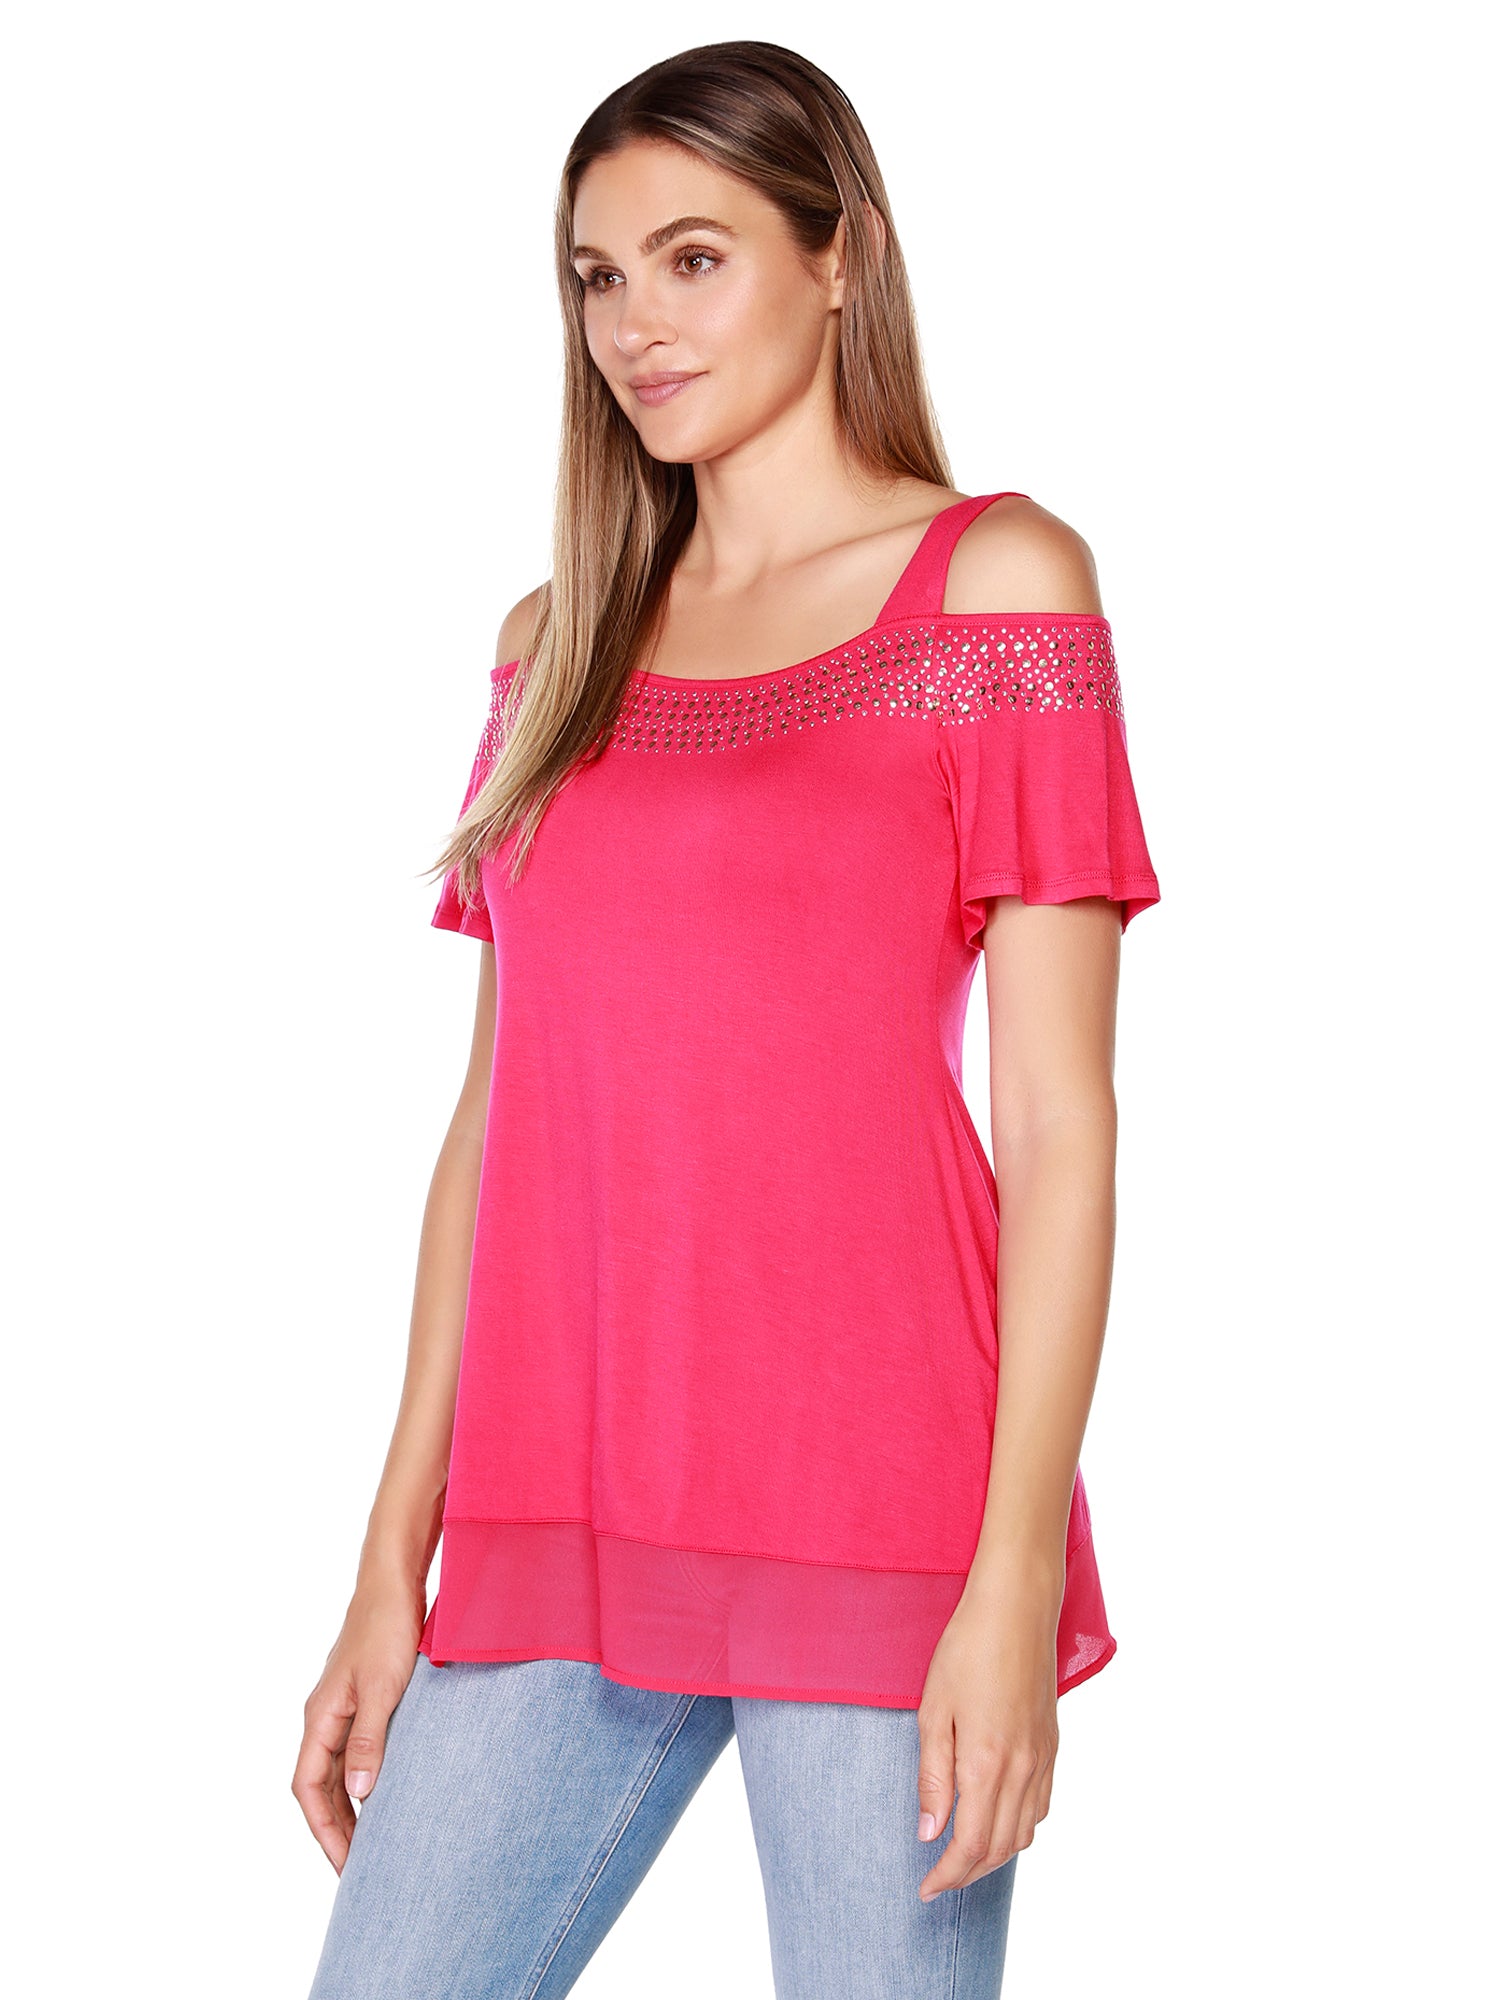 Women's Flutter Sleeve Cold Shoulder Pull Over Top with Stud and Sequin Trim